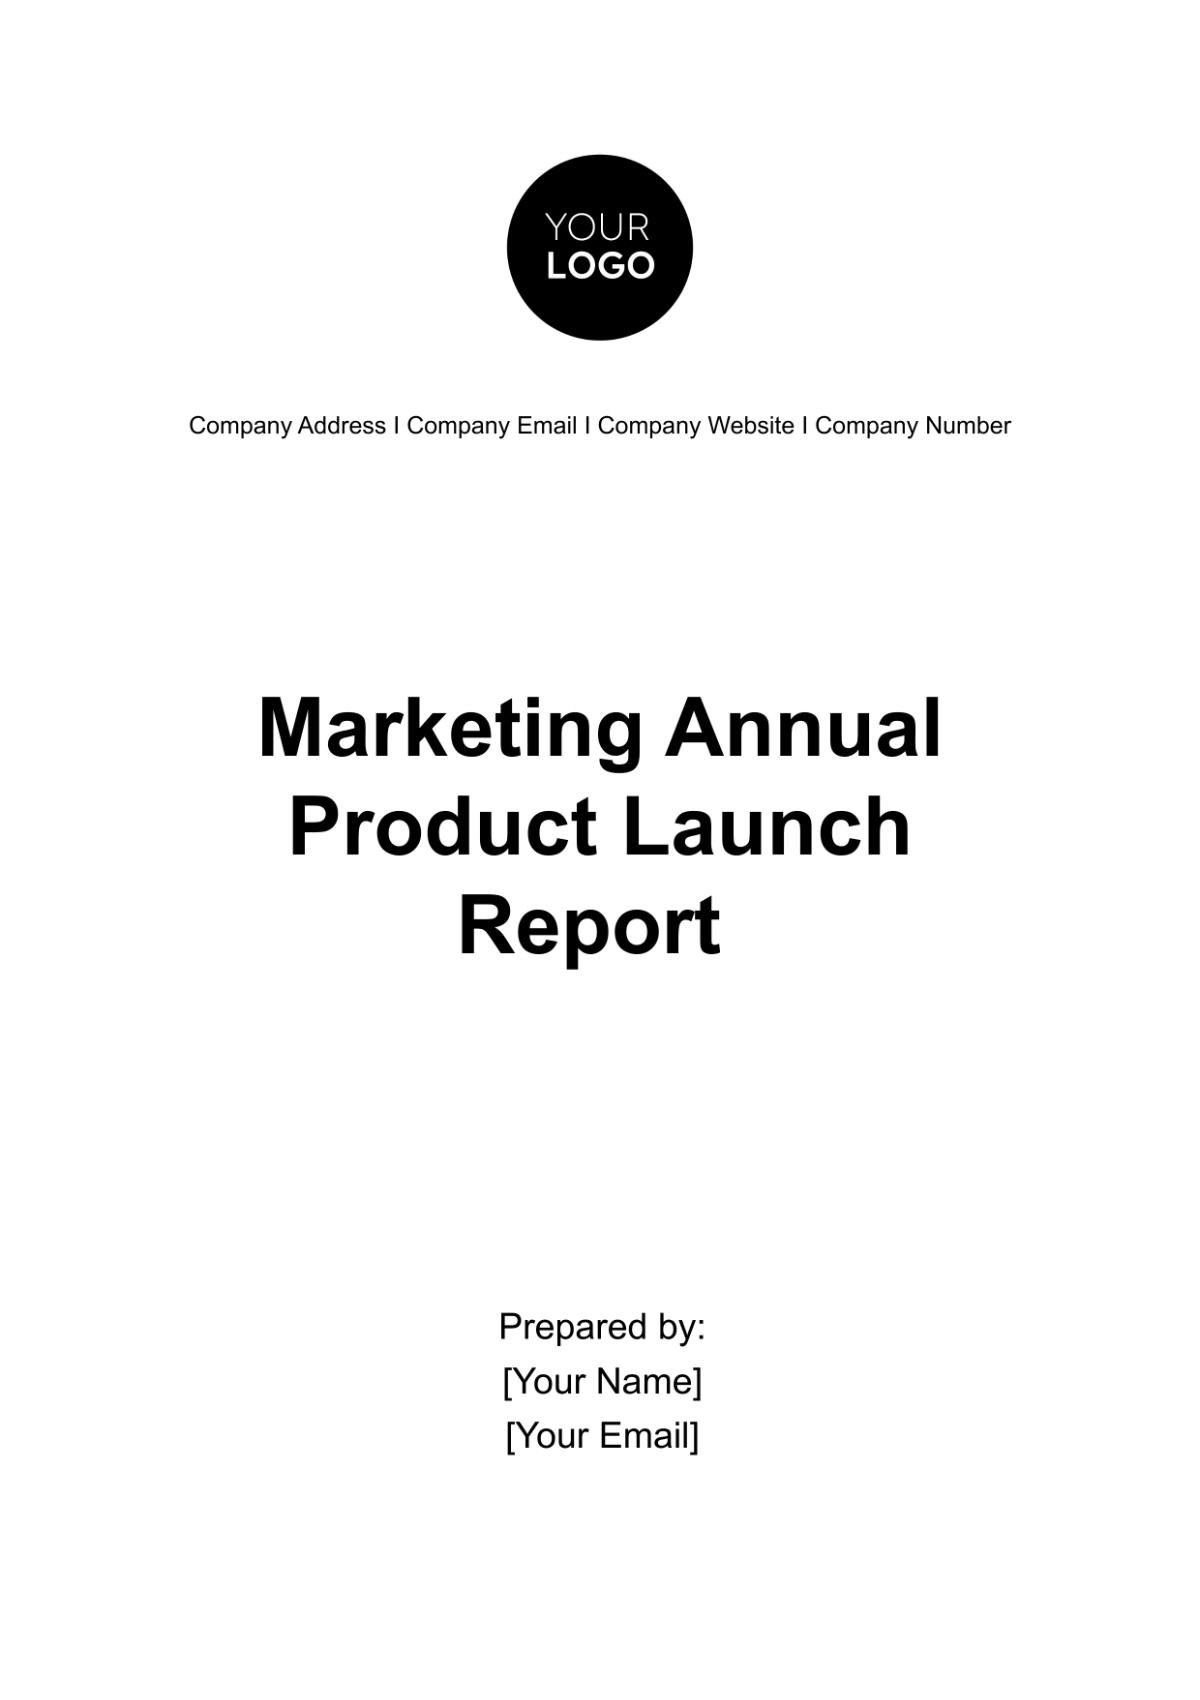 Marketing Annual Product Launch Report Template